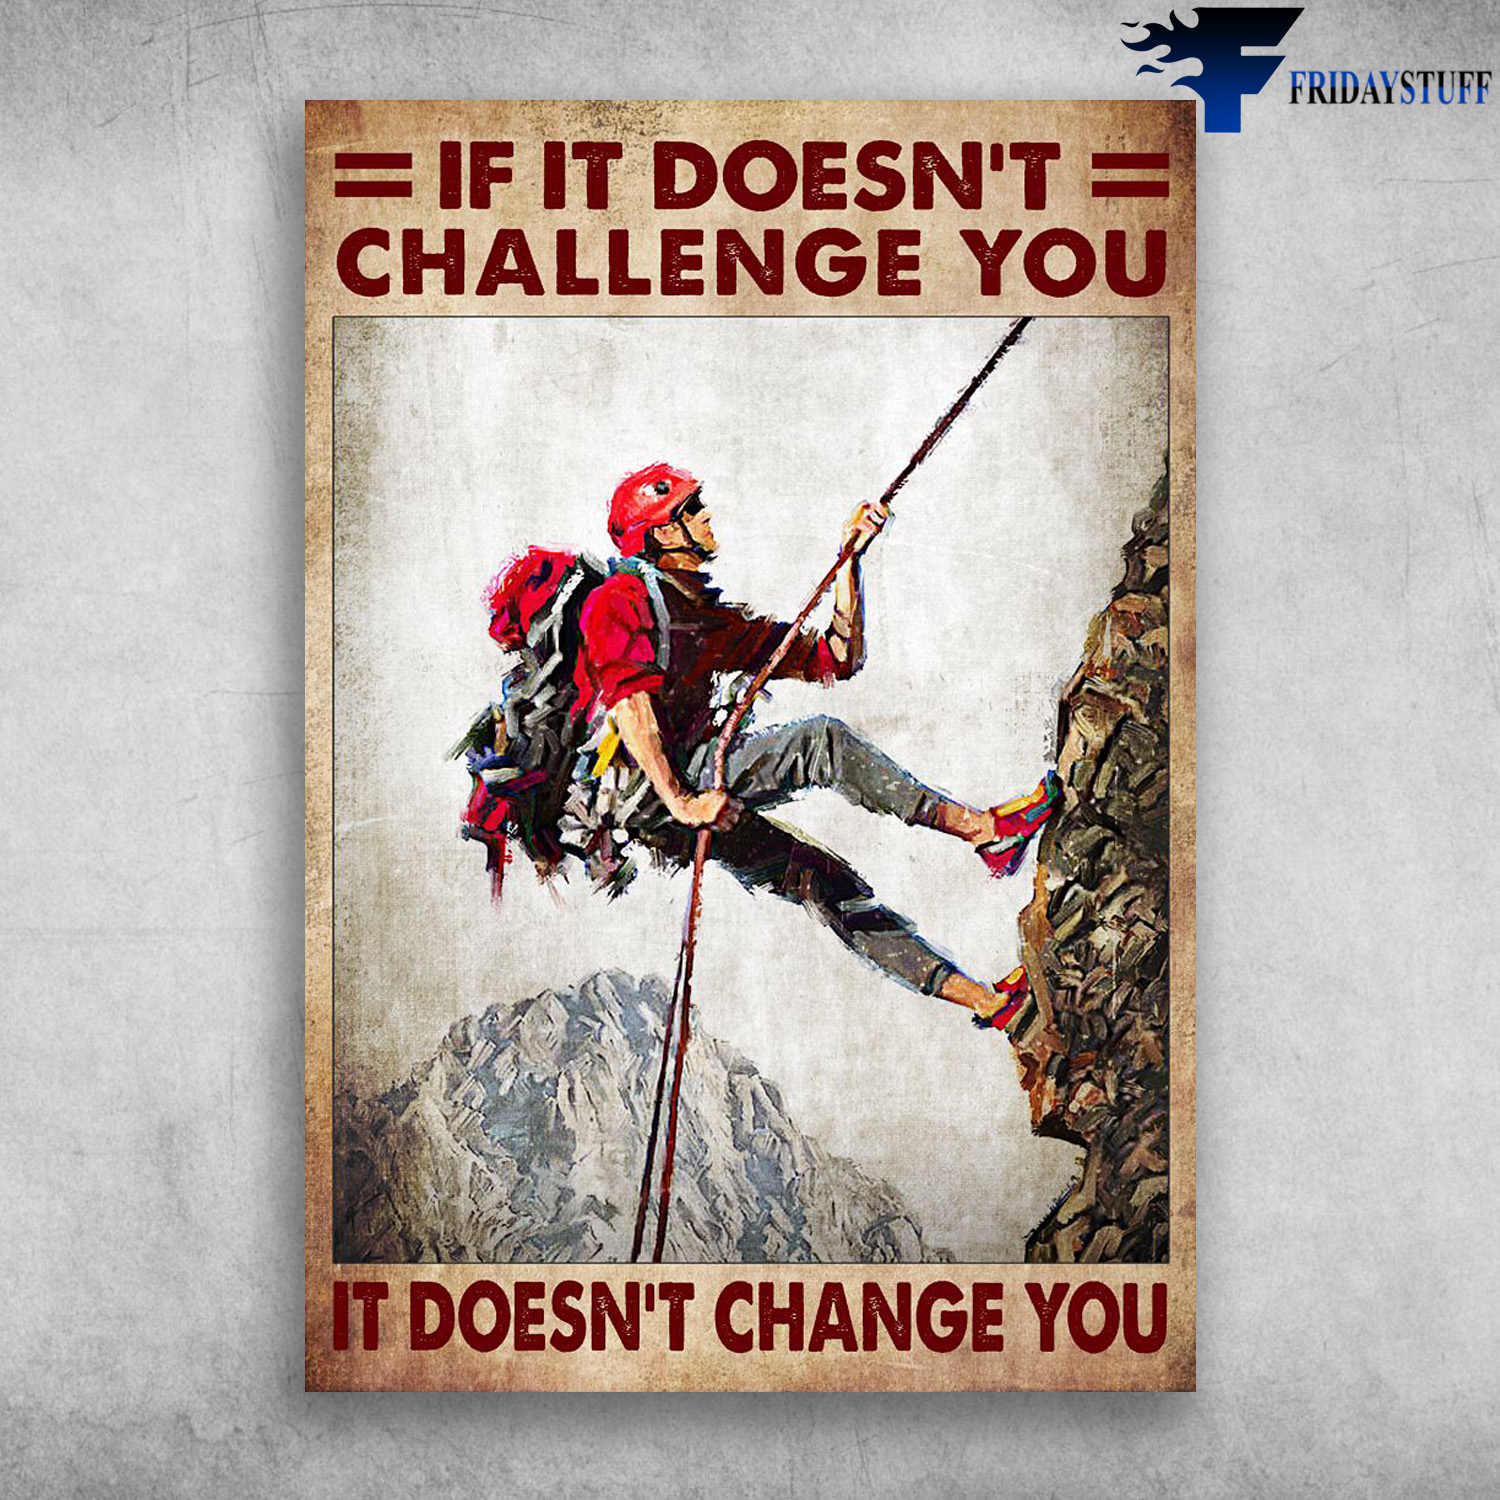 Man Climbing - If It Doesn't Challenge You, It Doesn't Change You